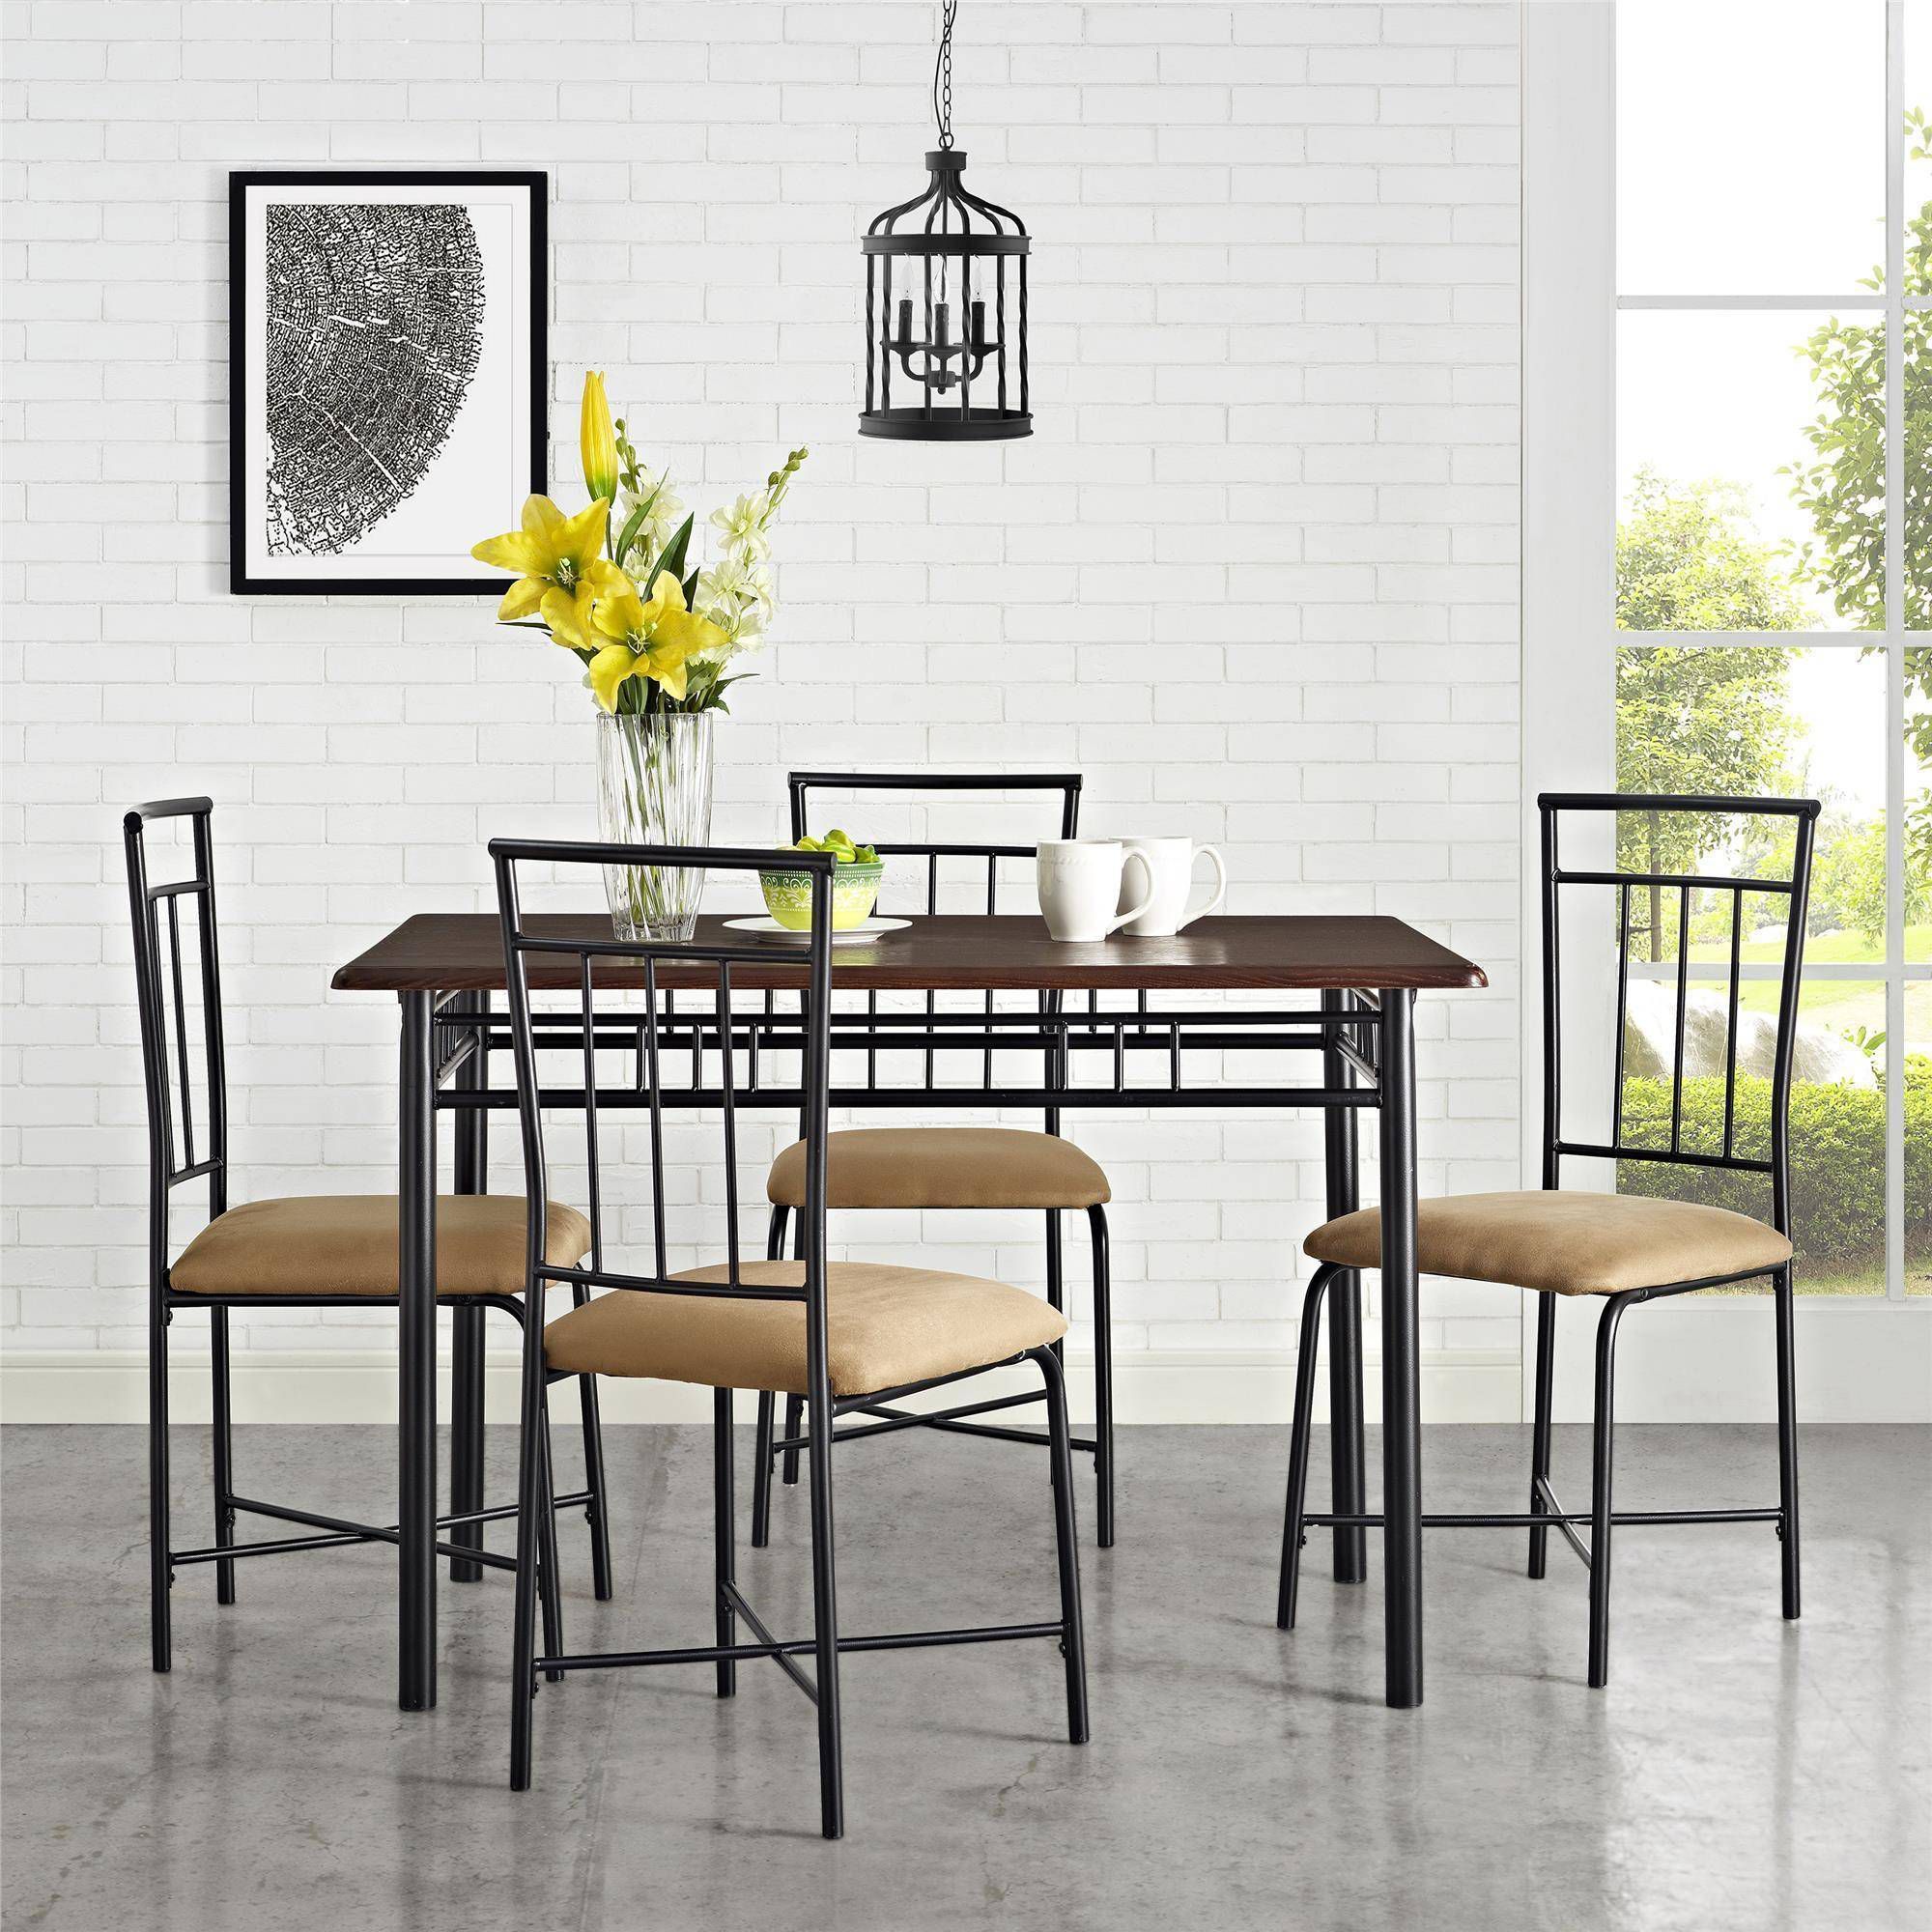 NEW Kitchen Dining Table Set Indoor Decoration Home Wood Top Chairs Elegant Metal Seats Food Serving Cushioning Room Nook Family Meals Strong*↓READ↓*